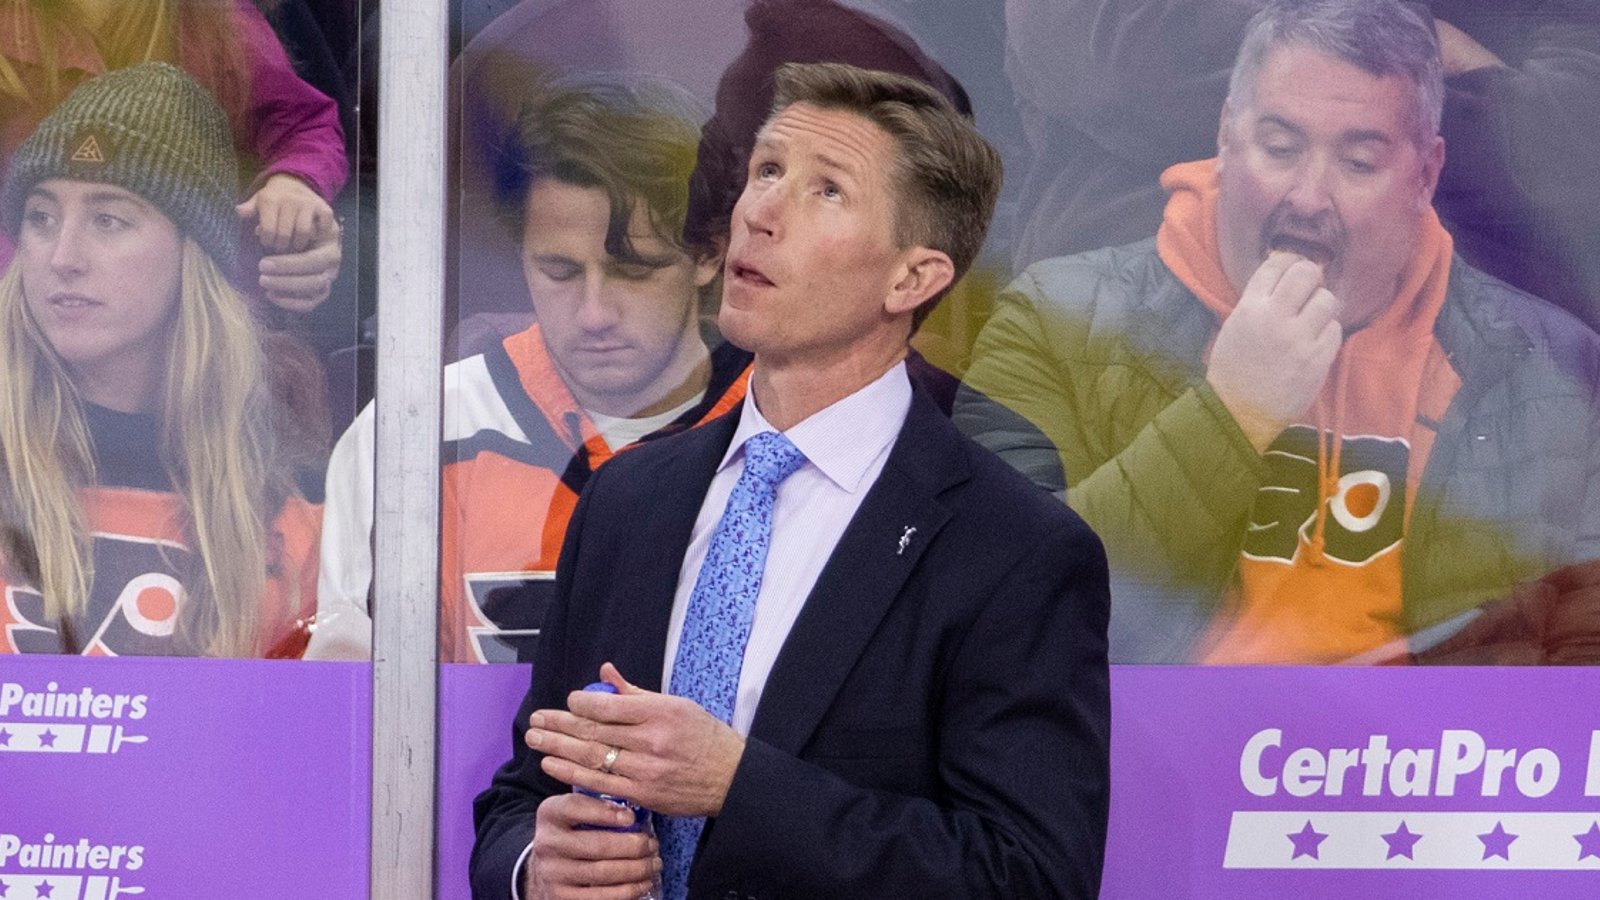 Breaking: Former Flyers head coach Dave Hakstol joins a rival NHL team.